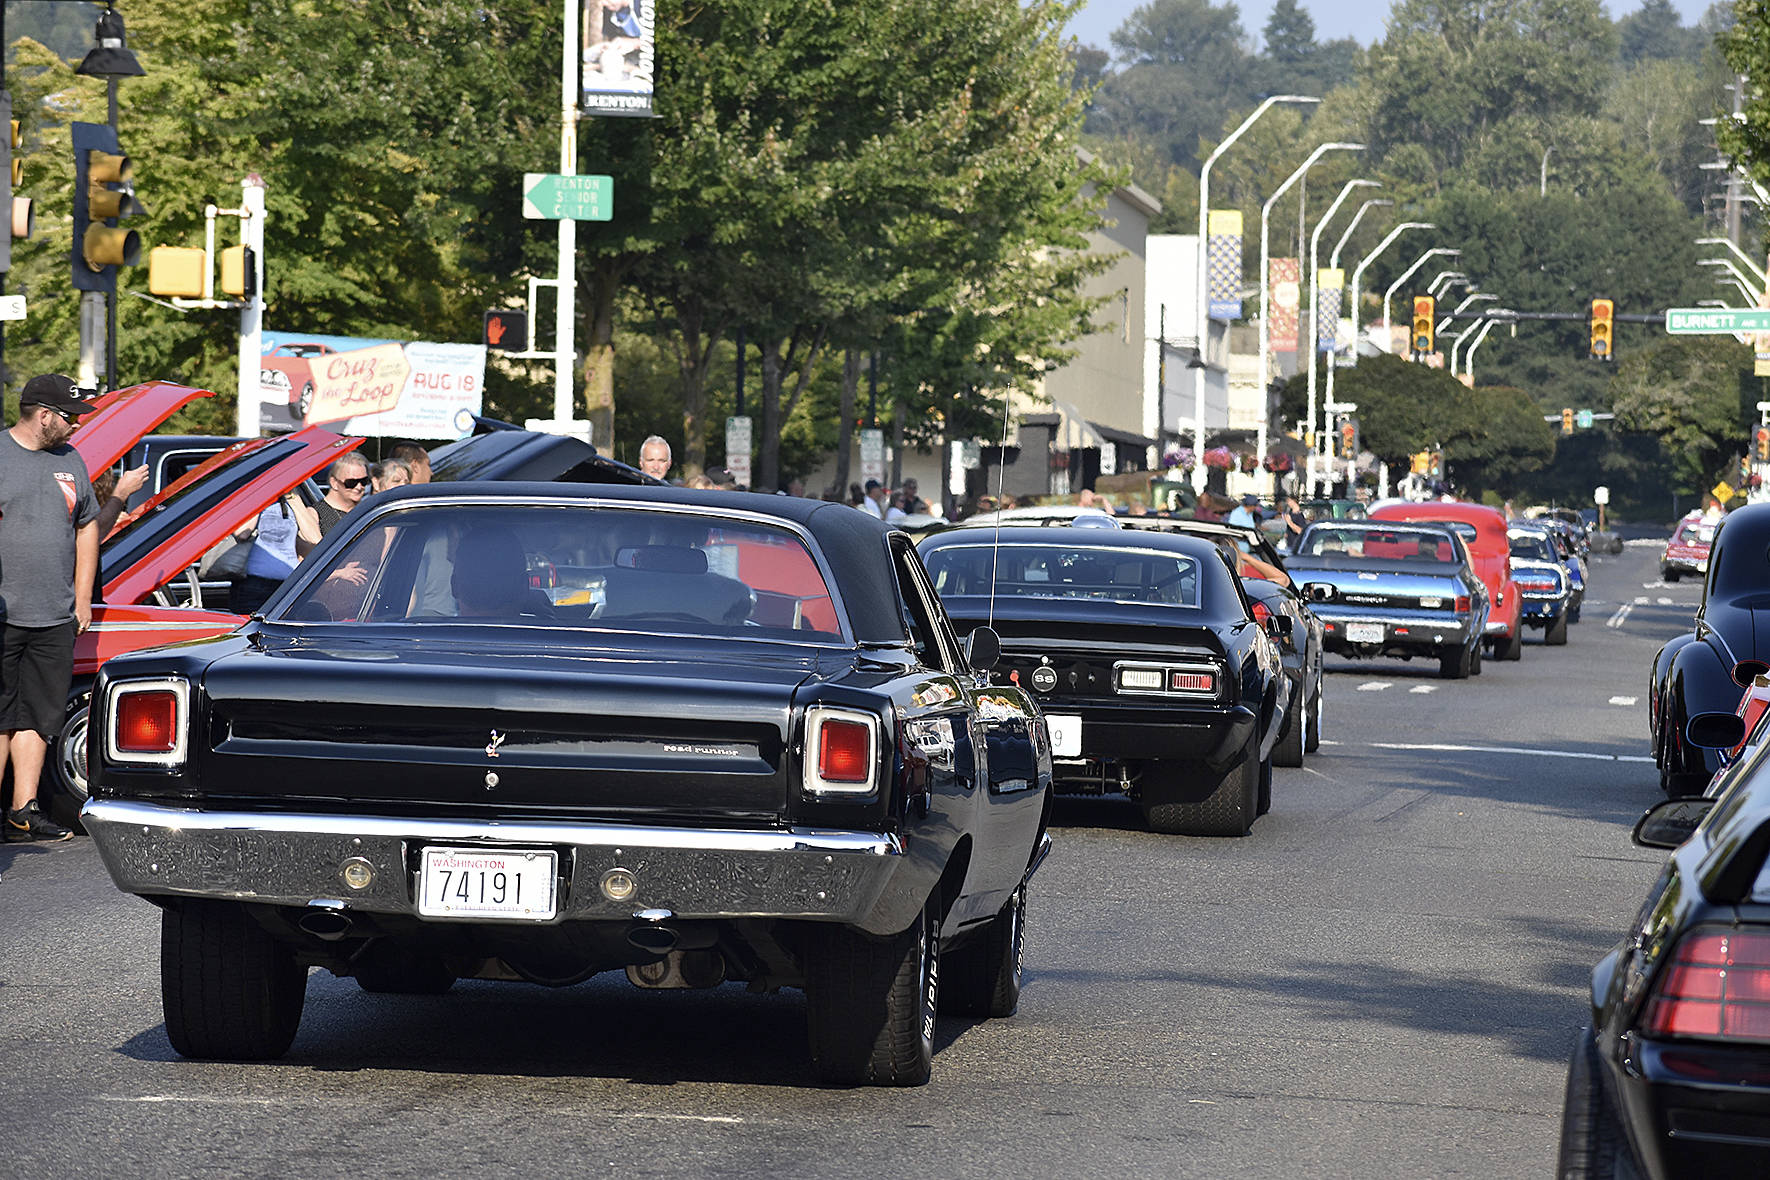 Cruz the Loop and Return to Renton Benefit Car Show set for July 6, 7